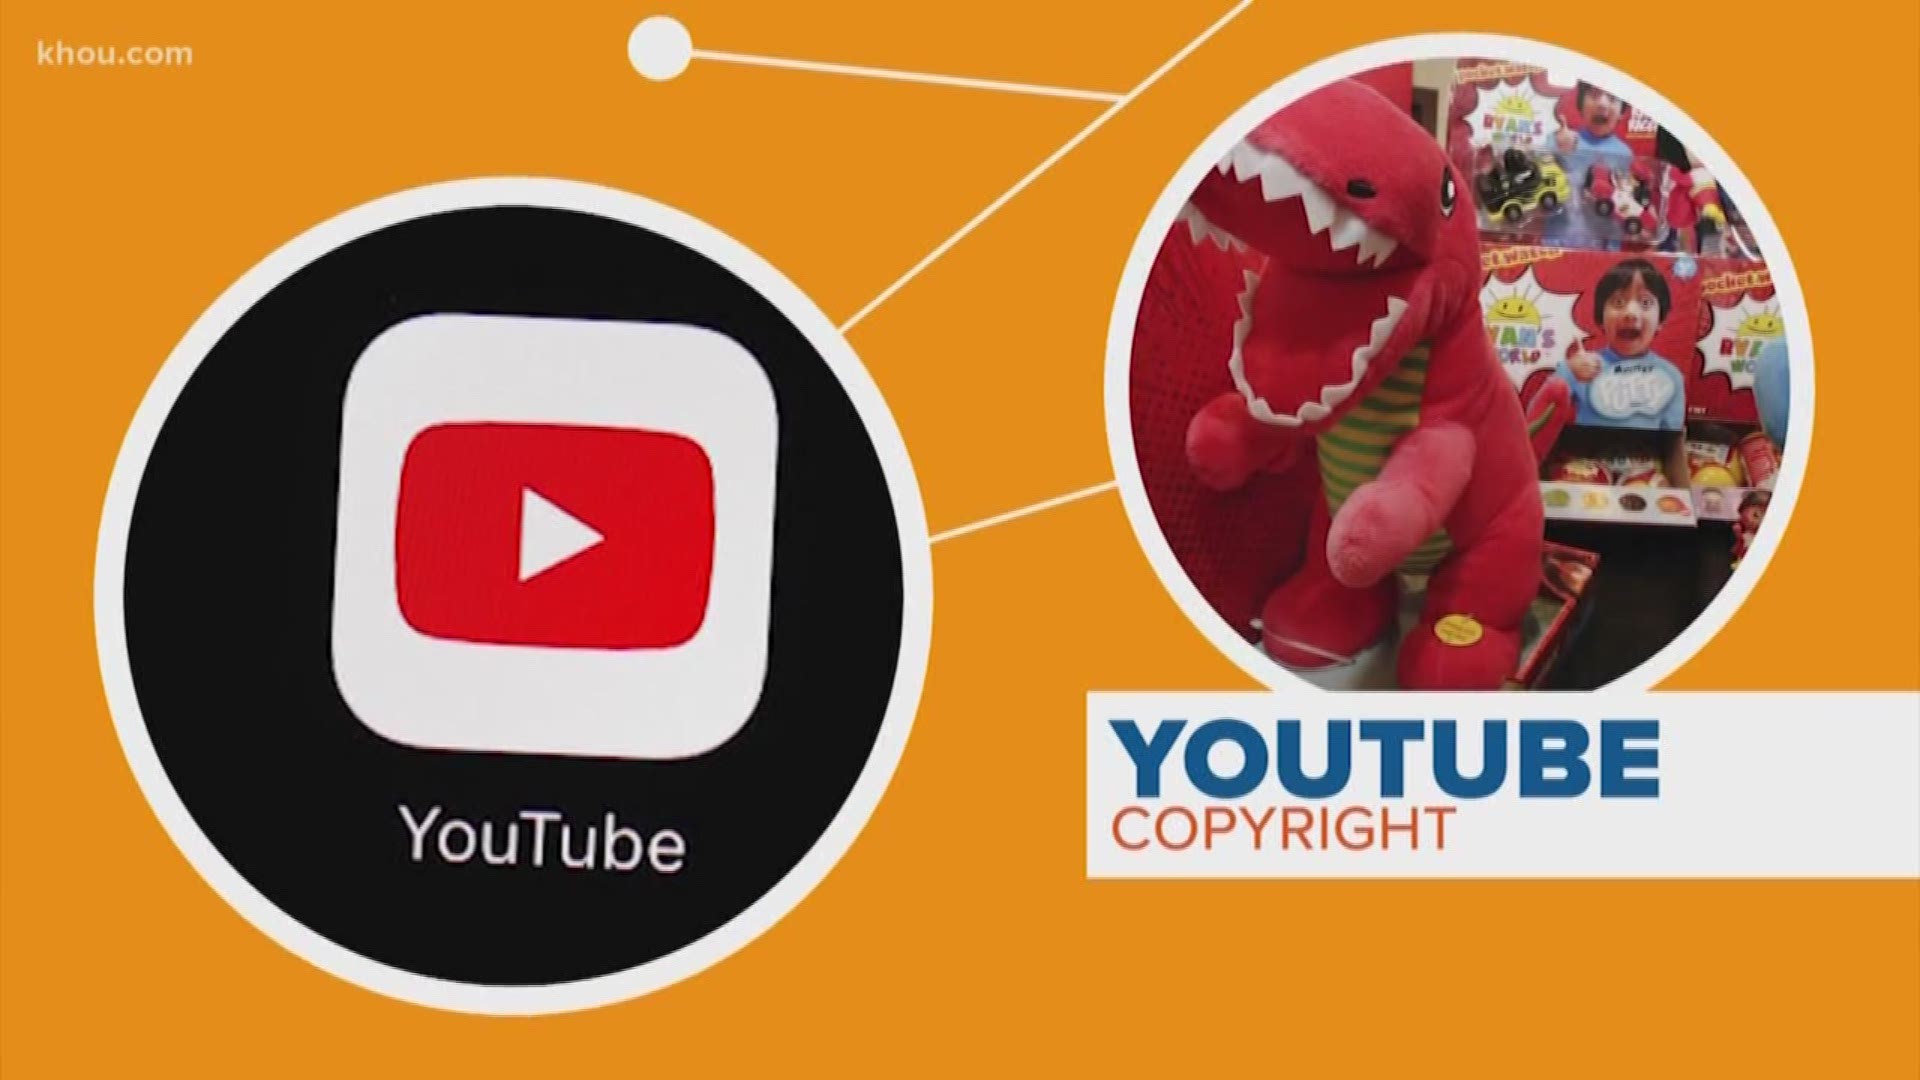 Youtubers Say Theyre Being Barraged With Fake Copyright Claims